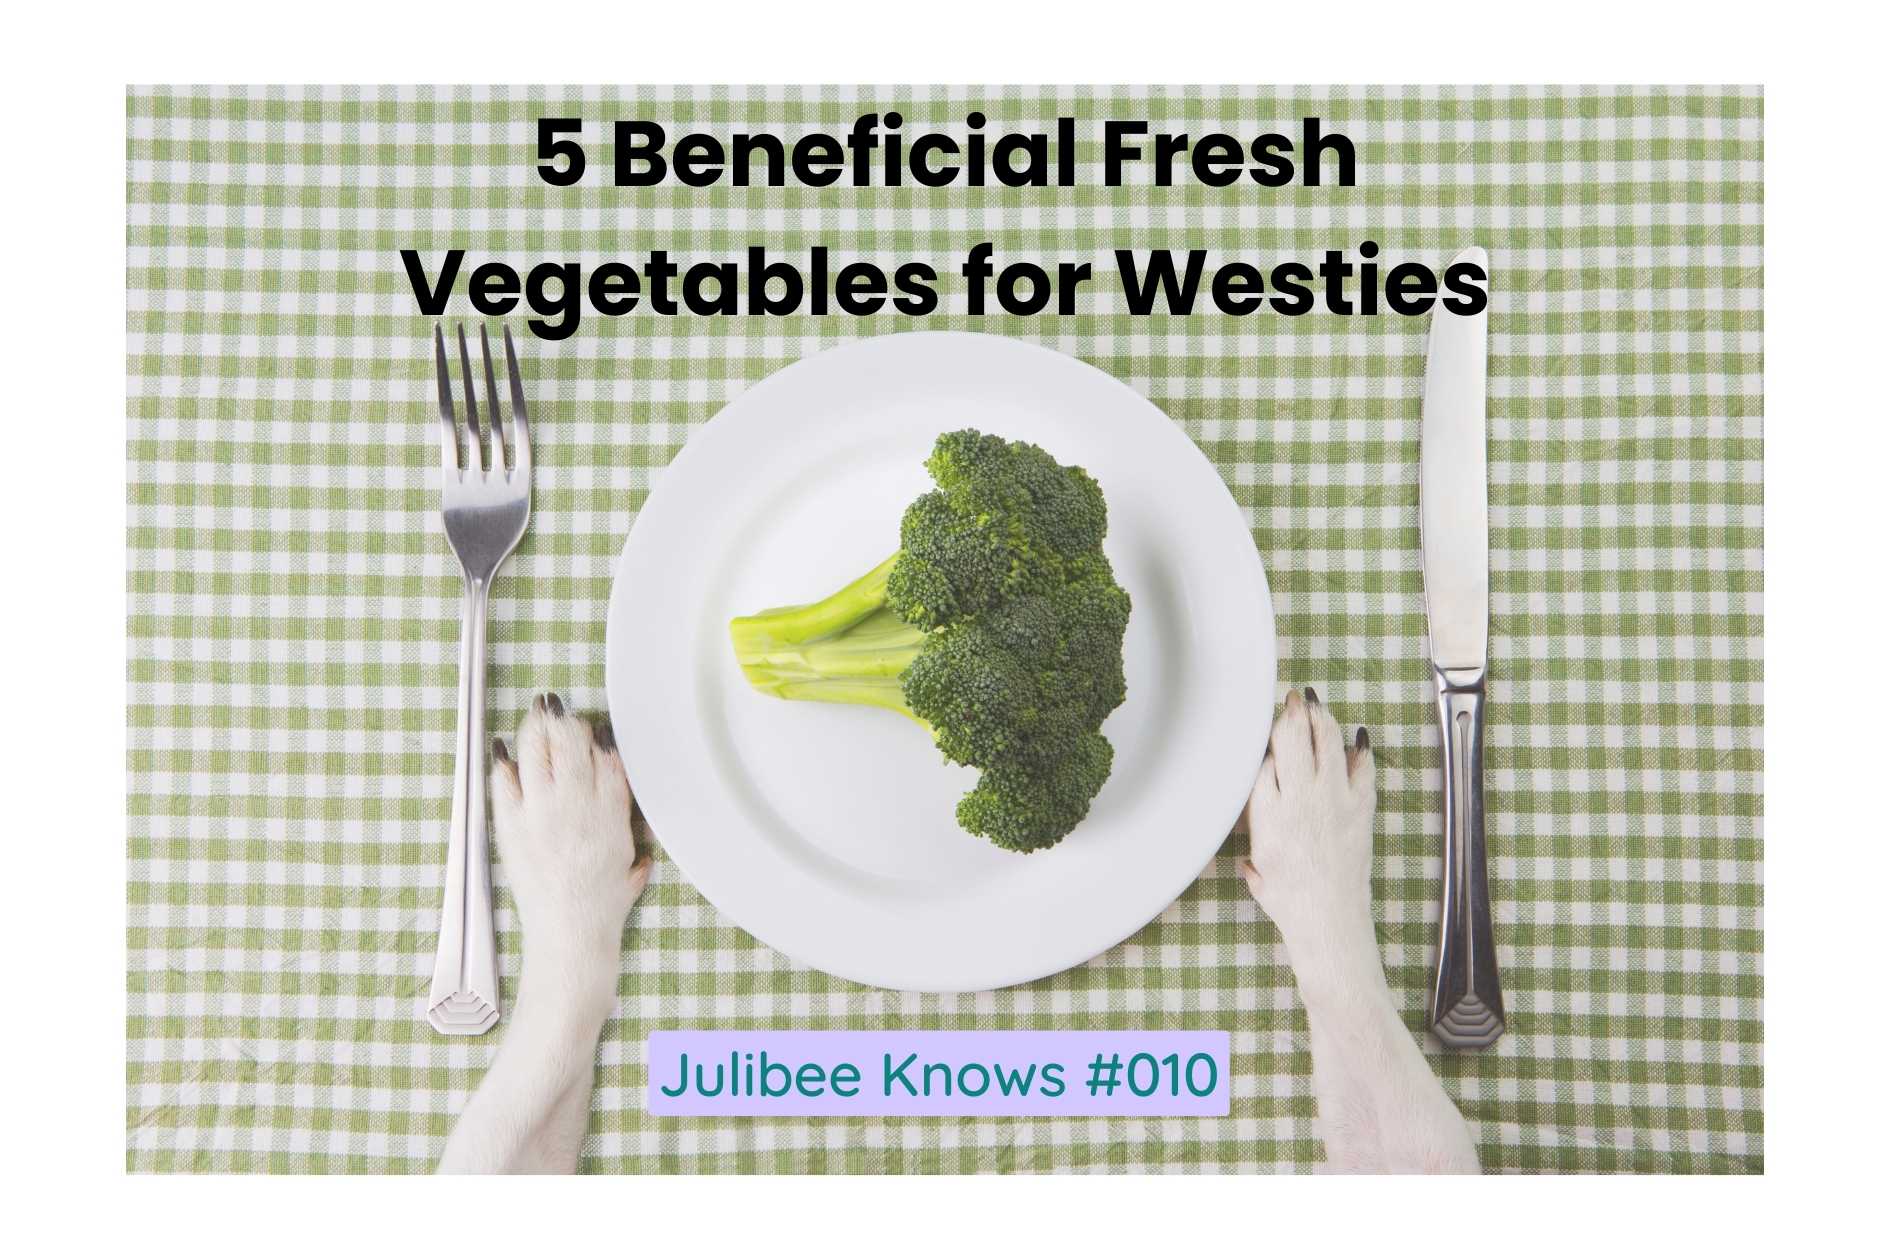 5 Beneficial Fresh Vegetables for Westies